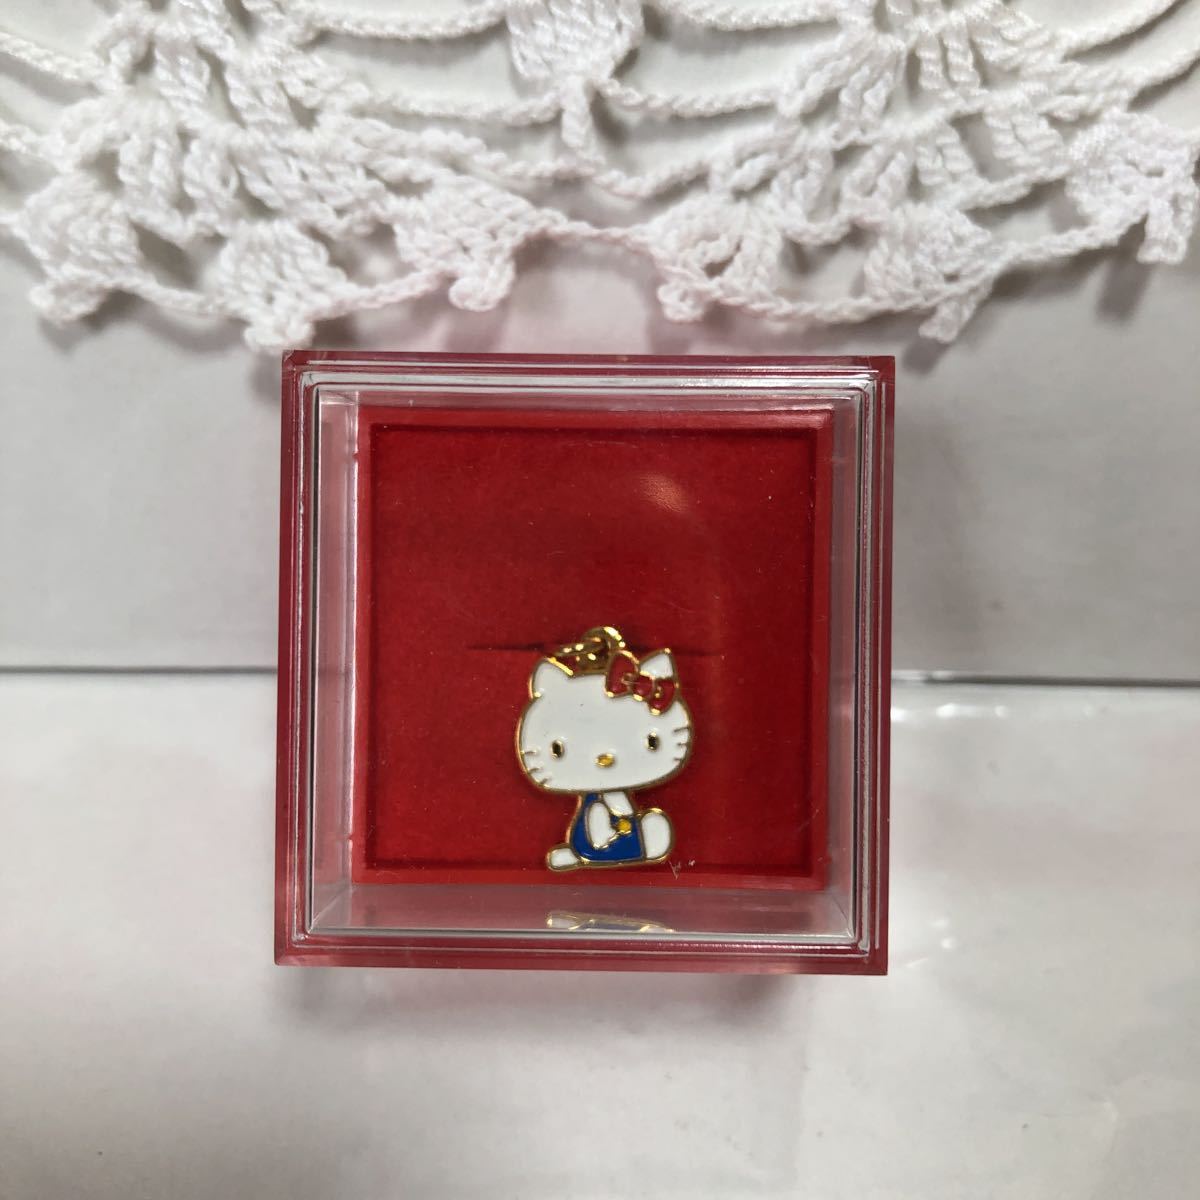  Kitty * Hello Kitty * accessory *2 point set * necklace ring ring * retro that time thing *1999 year * Sanrio *SANRIO* box attaching unused goods 